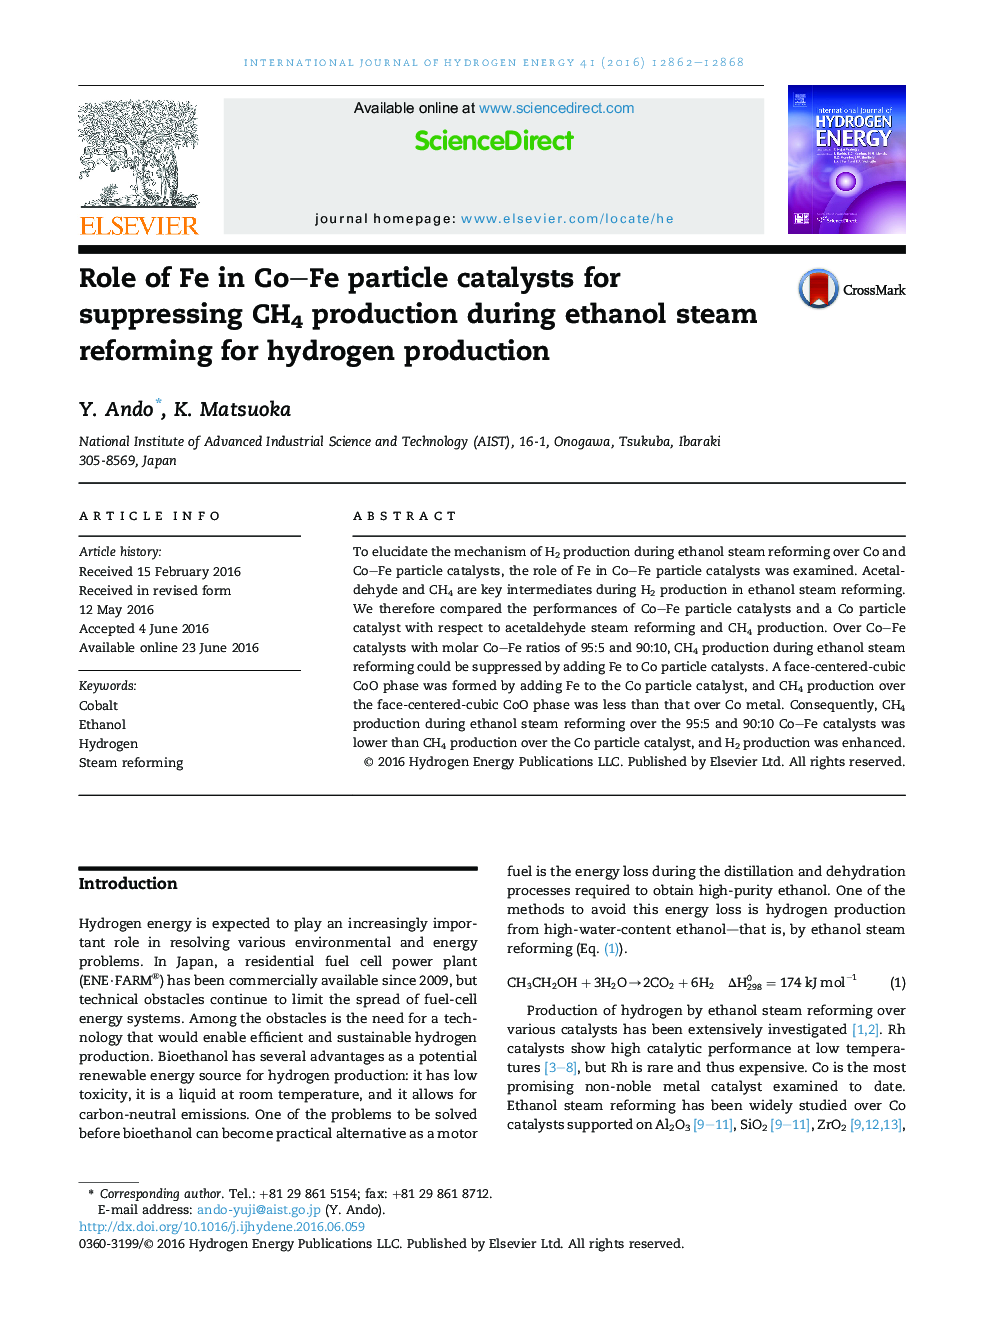 Role of Fe in Co–Fe particle catalysts for suppressing CH4 production during ethanol steam reforming for hydrogen production